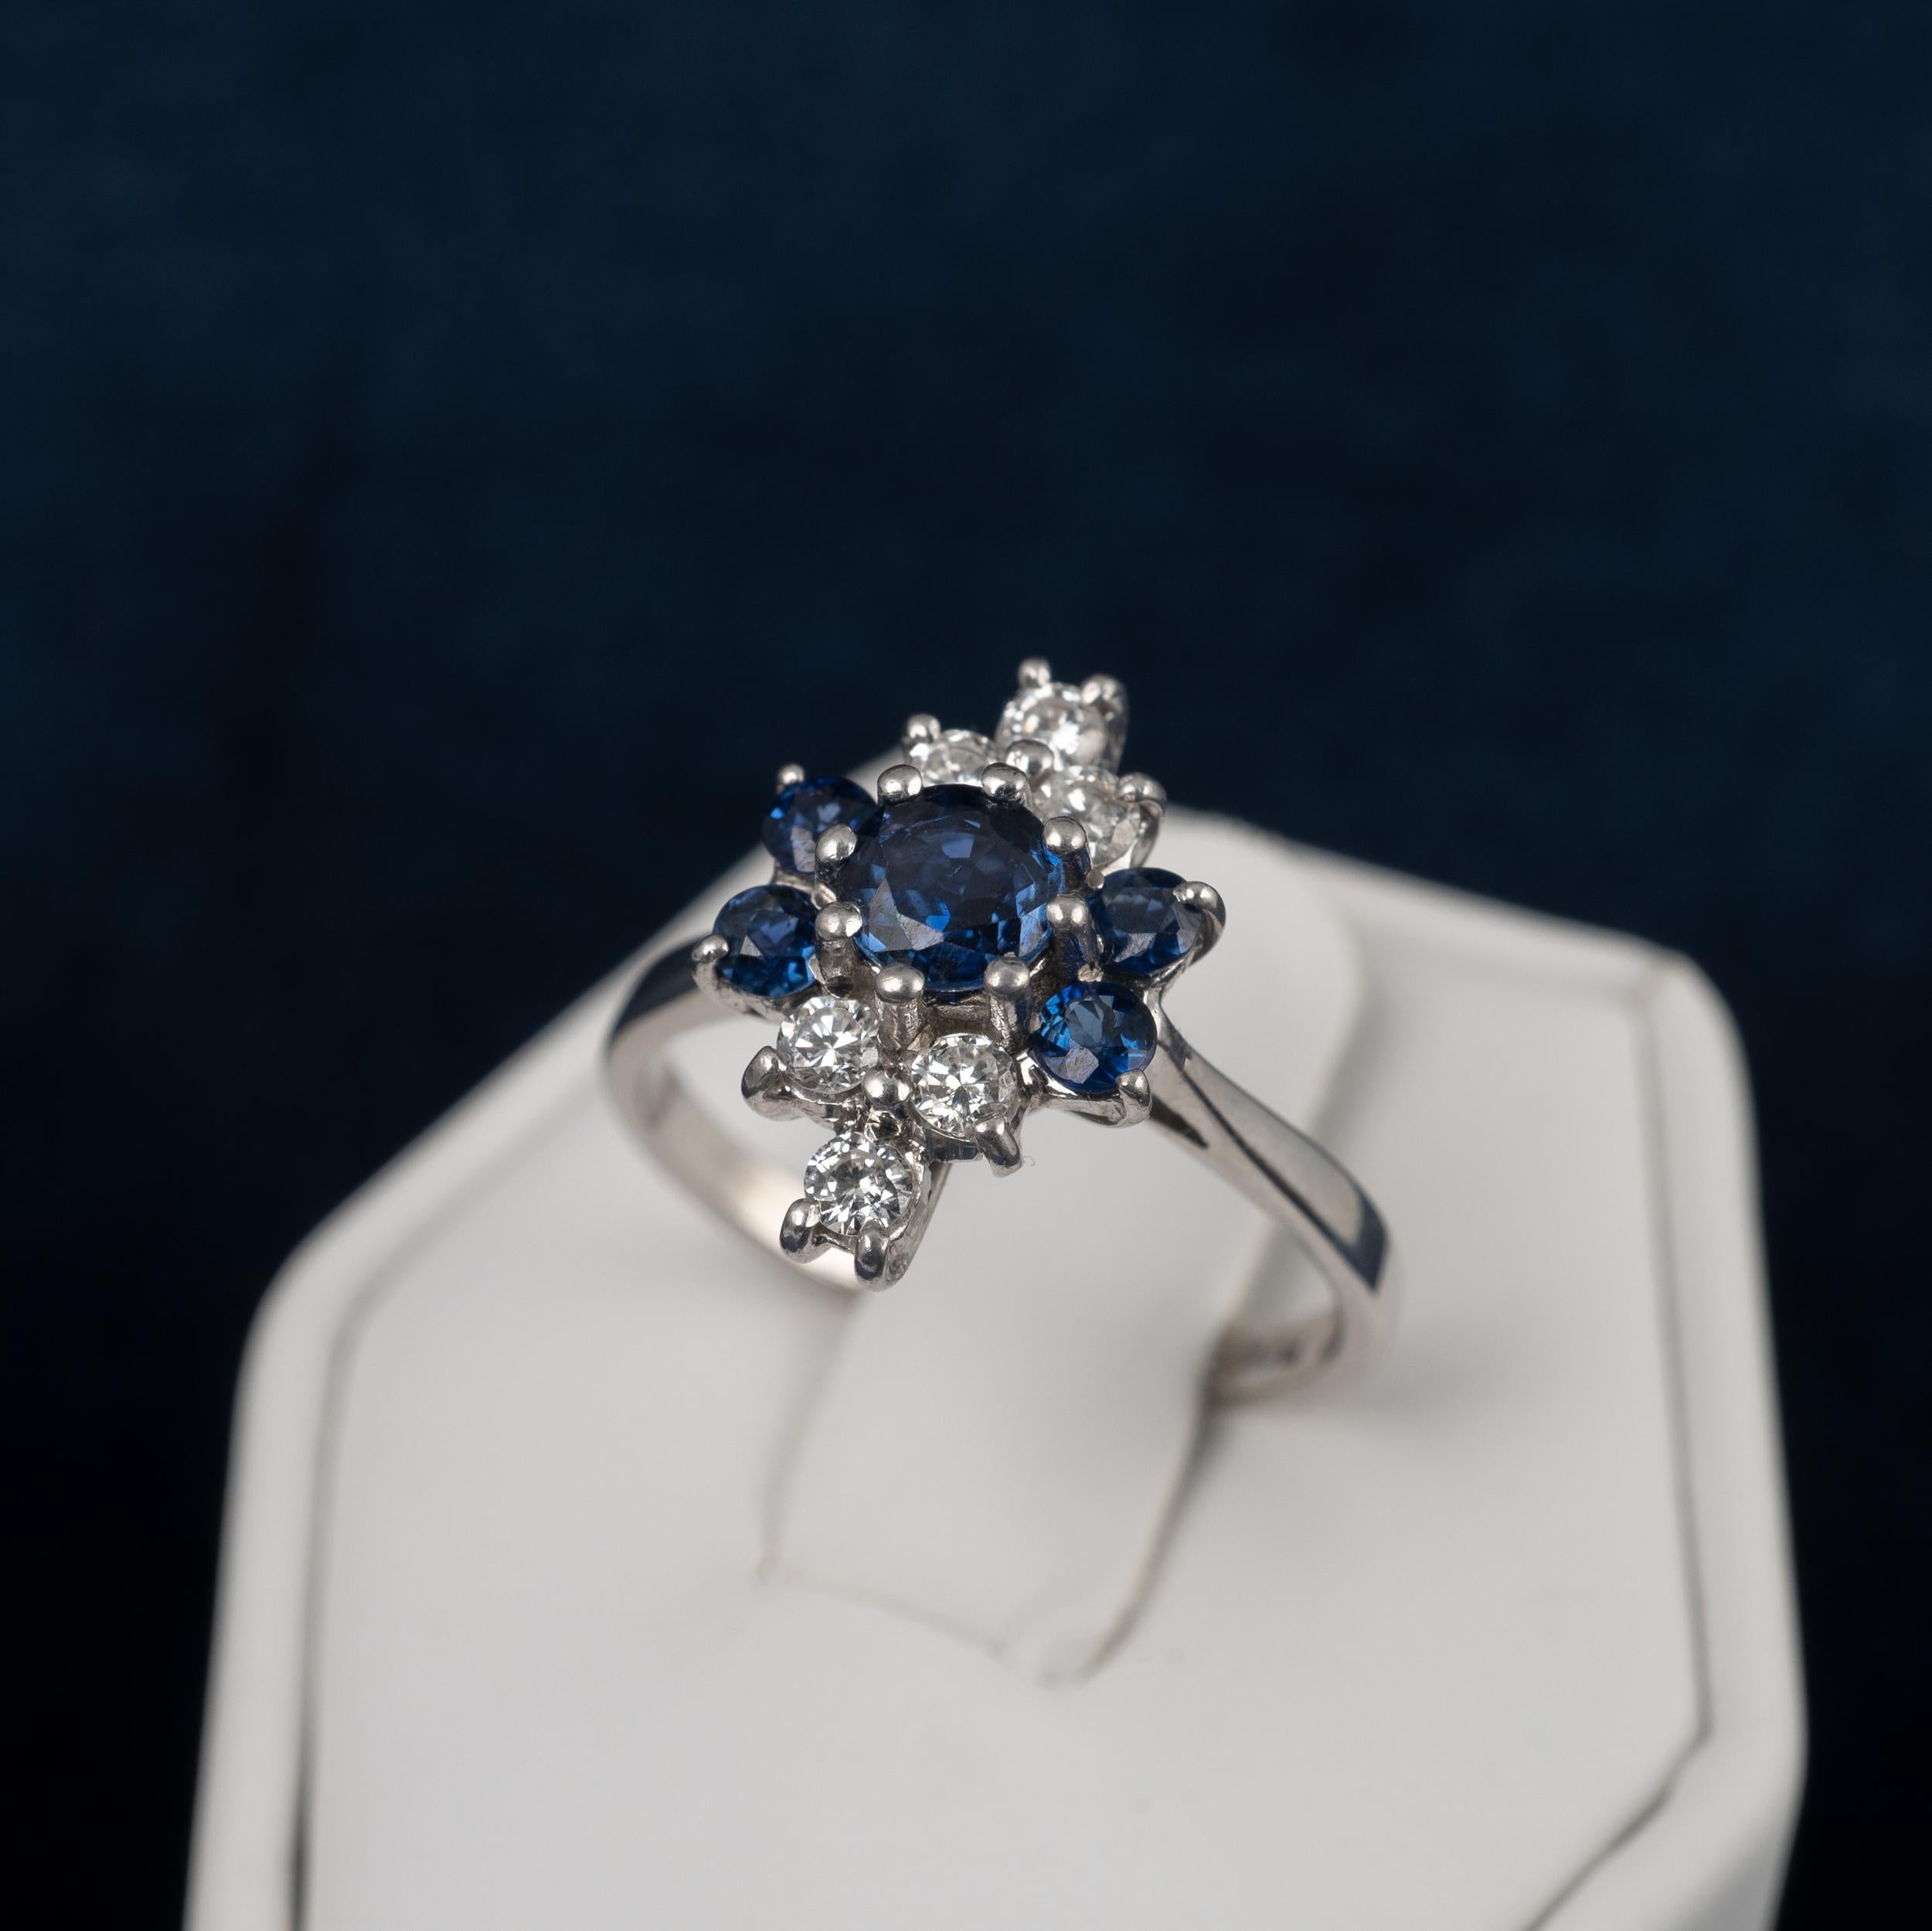 A beautiful and striking sapphire diamond cluster ring crafted in 18 karat white gold.

A central round cut 0.35-carat sapphire is flanked each side by a pair of smaller matching sapphires of 0.06cts each. To complement the rich blue of the